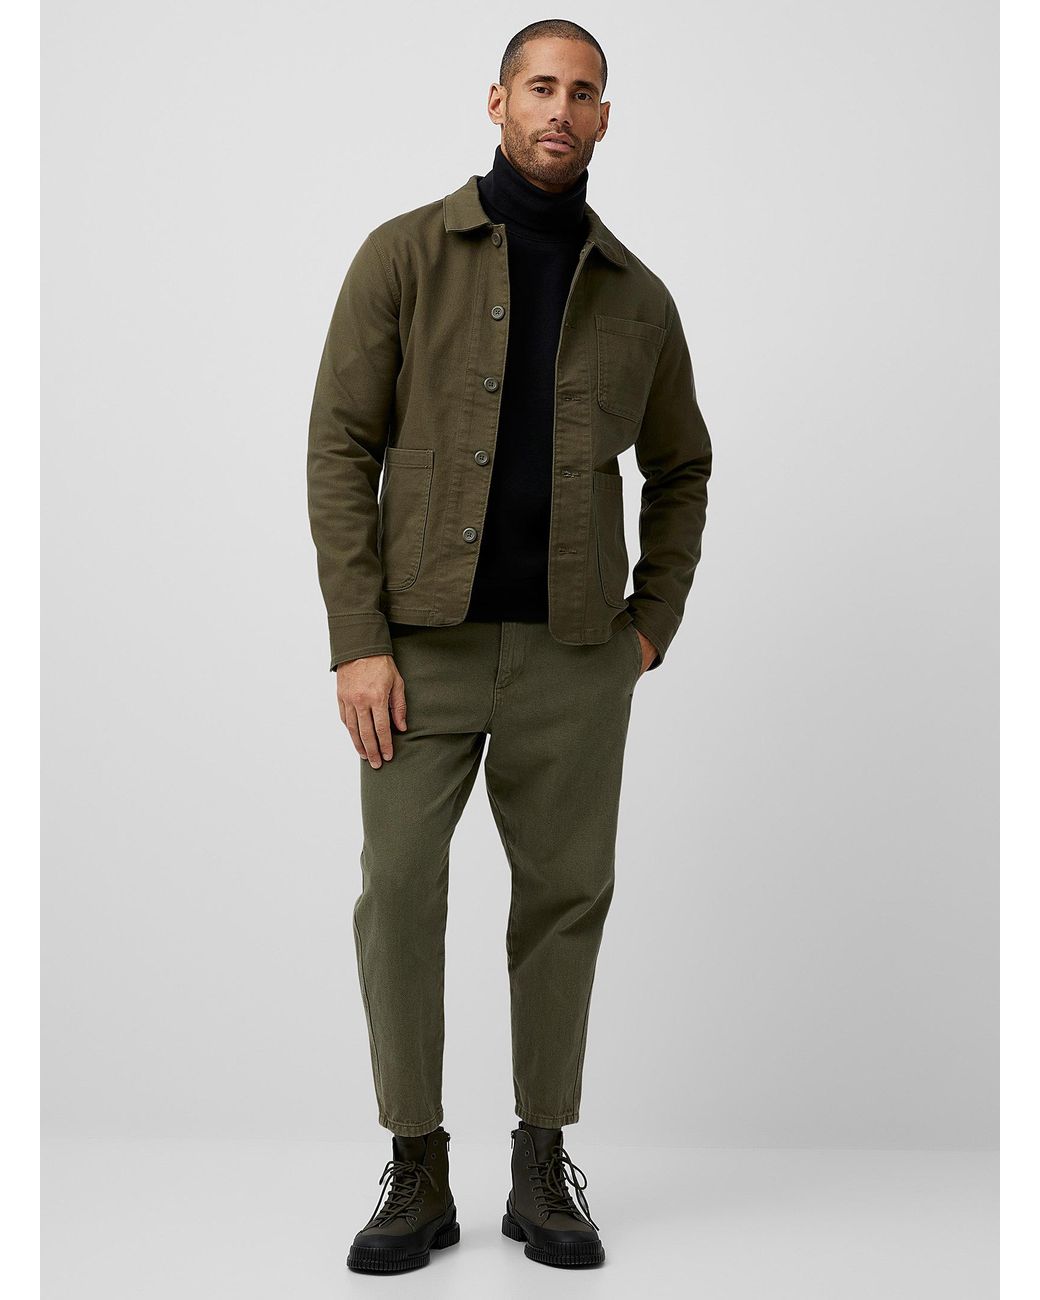 Jack & Jones Stretch Cotton Chore Jacket in Green for Men | Lyst Canada